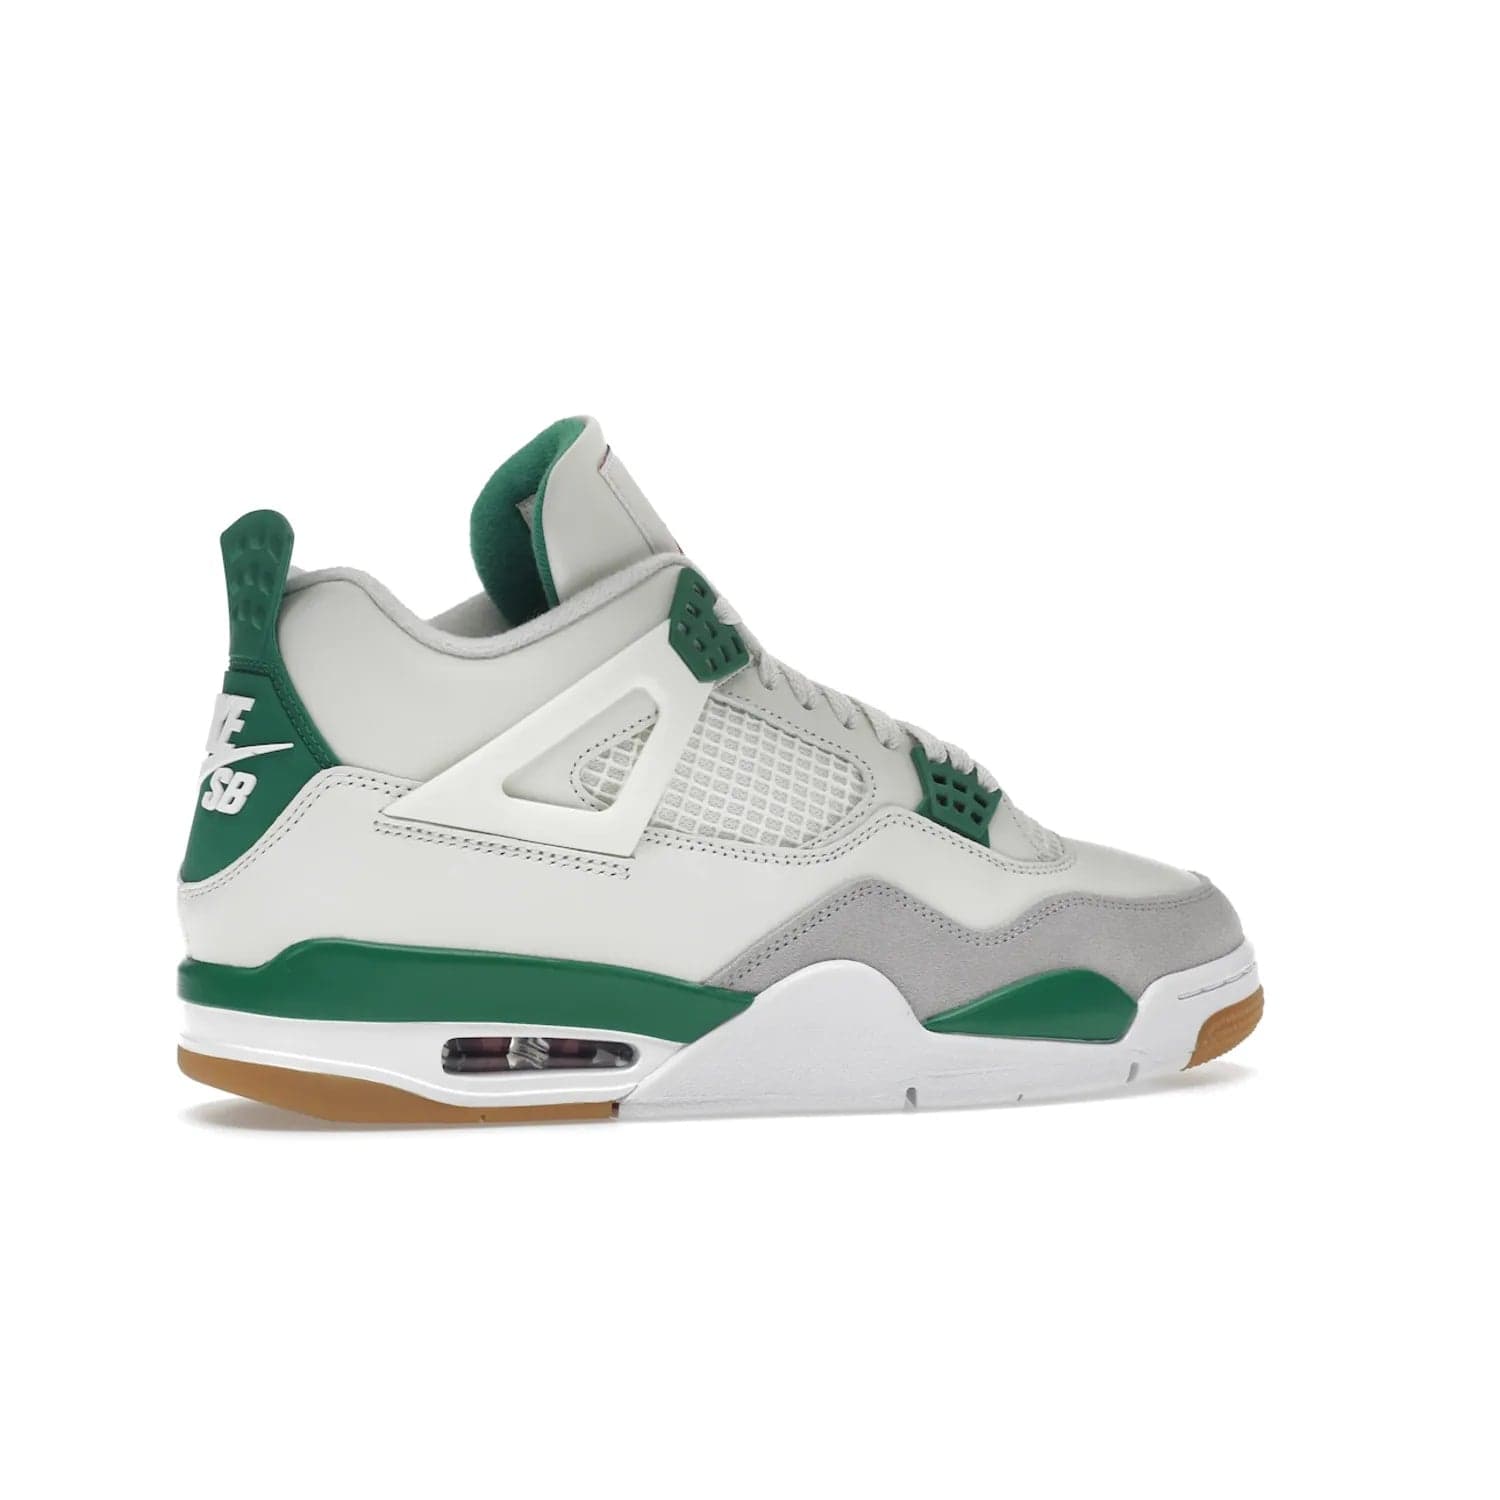 Jordan 4 Retro SB Pine Green - Image 35 - Only at www.BallersClubKickz.com - A white leather upper combined with a Neutral Grey suede mudguard gives this limited Air Jordan 4 Retro SB Pine Green sneaker its unmistakable style. Released March 20, 2023, the Jordan 4 Retro SB features a white and Pine Green midsole plus a red air unit with a gum outsole for grip. The perfect blend of Nike SB skateboarding and Jordan 4 classic design.